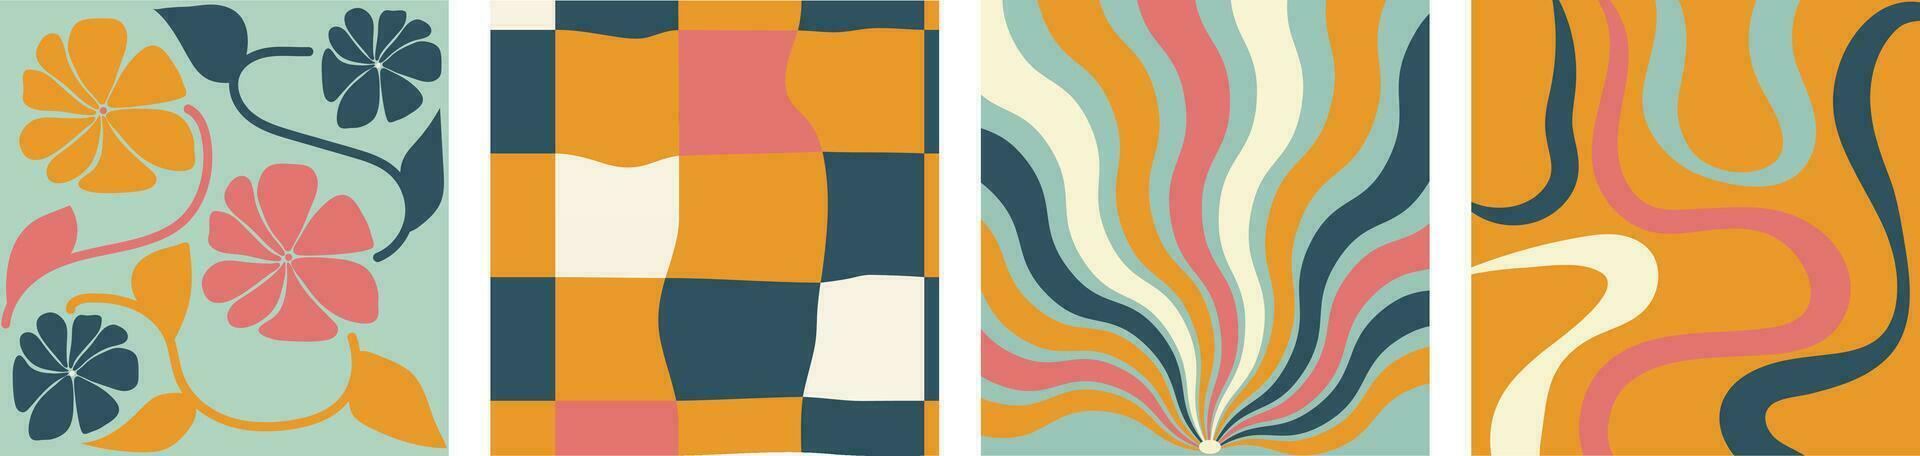 Collection of retro checkerboard backgrounds featuring vivid hues. A groovy and psychedelic chessboard pattern inspired by the 60s and 70s. vector